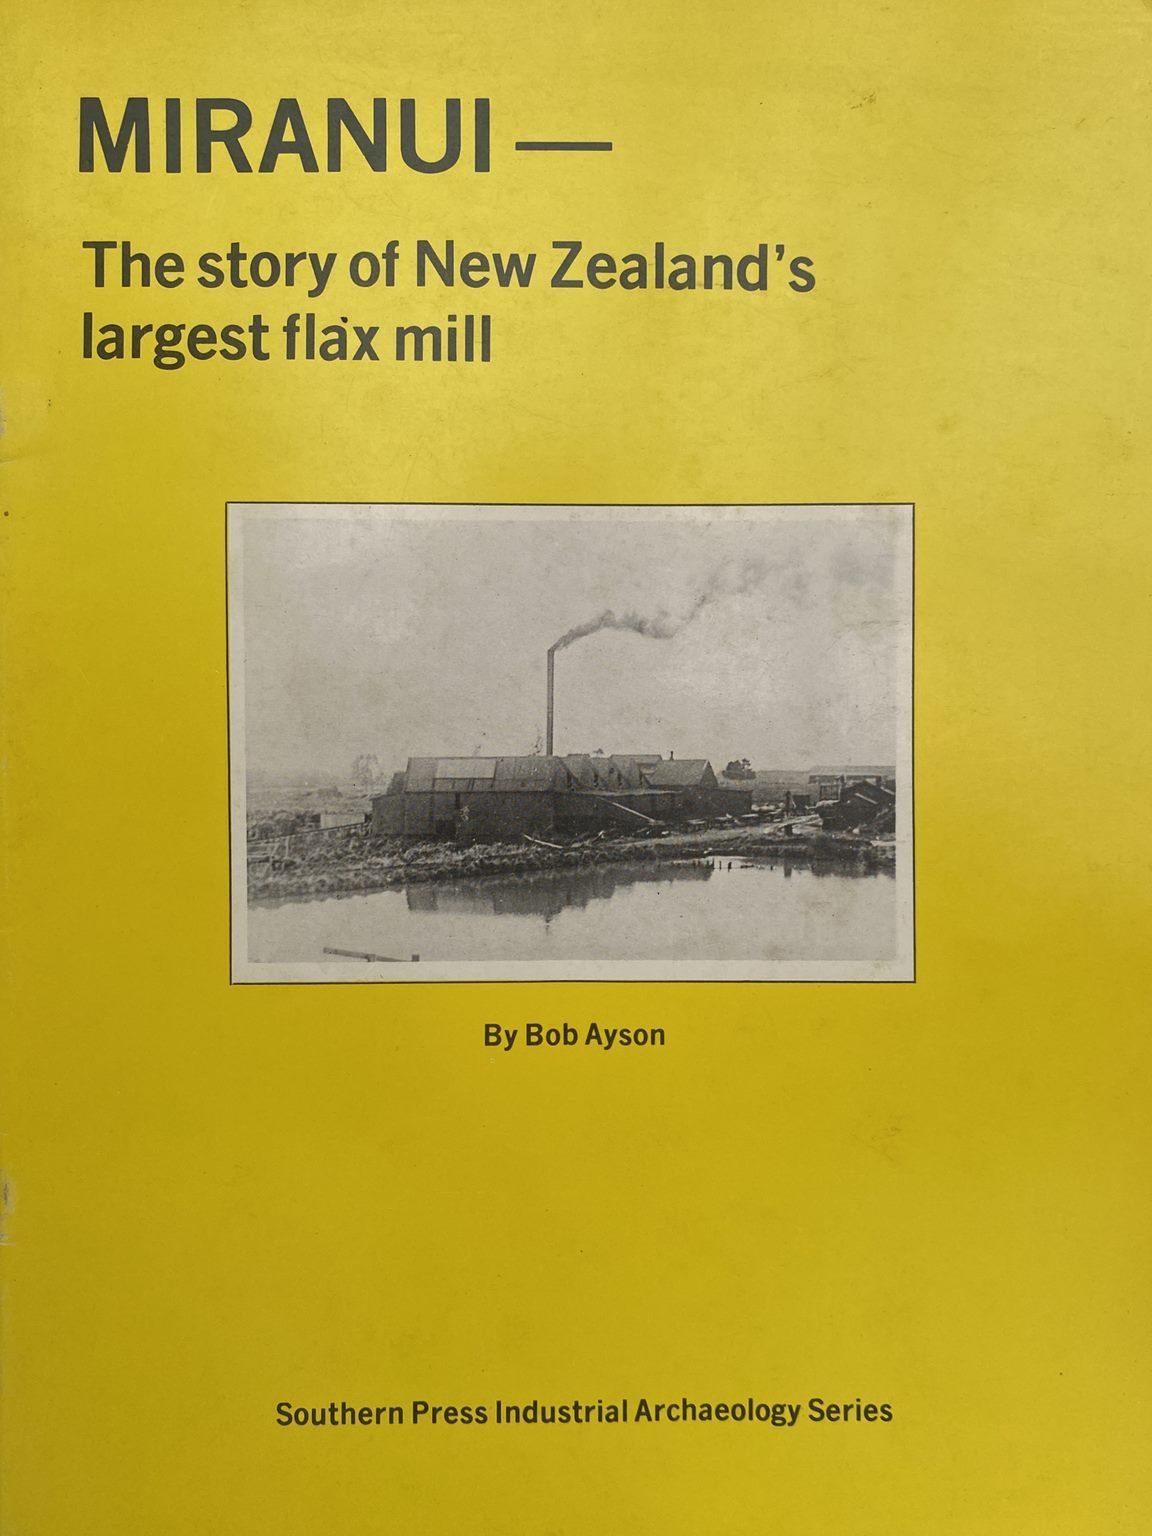 MIRANUI: The Story of New Zealand's Largest Flax Mill